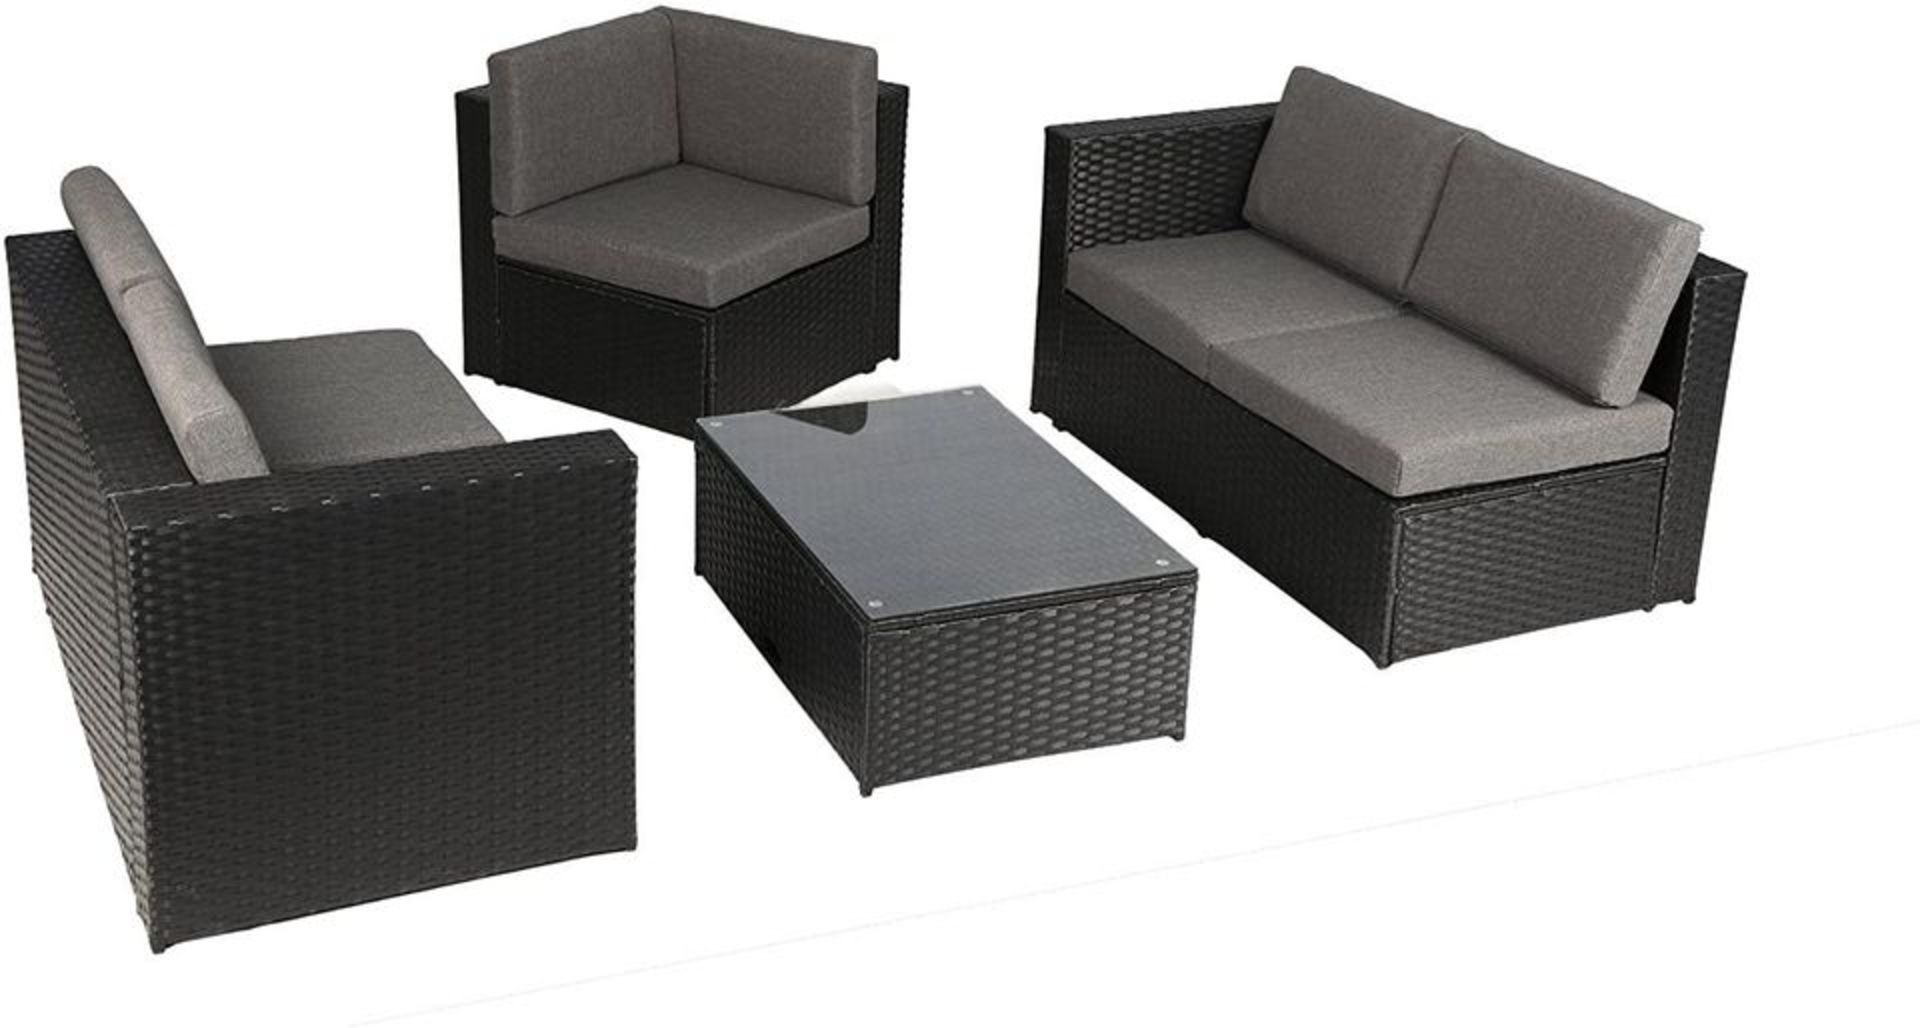 Gelston Black Corner Set with Coffee Table/Pouffee - Image 3 of 4